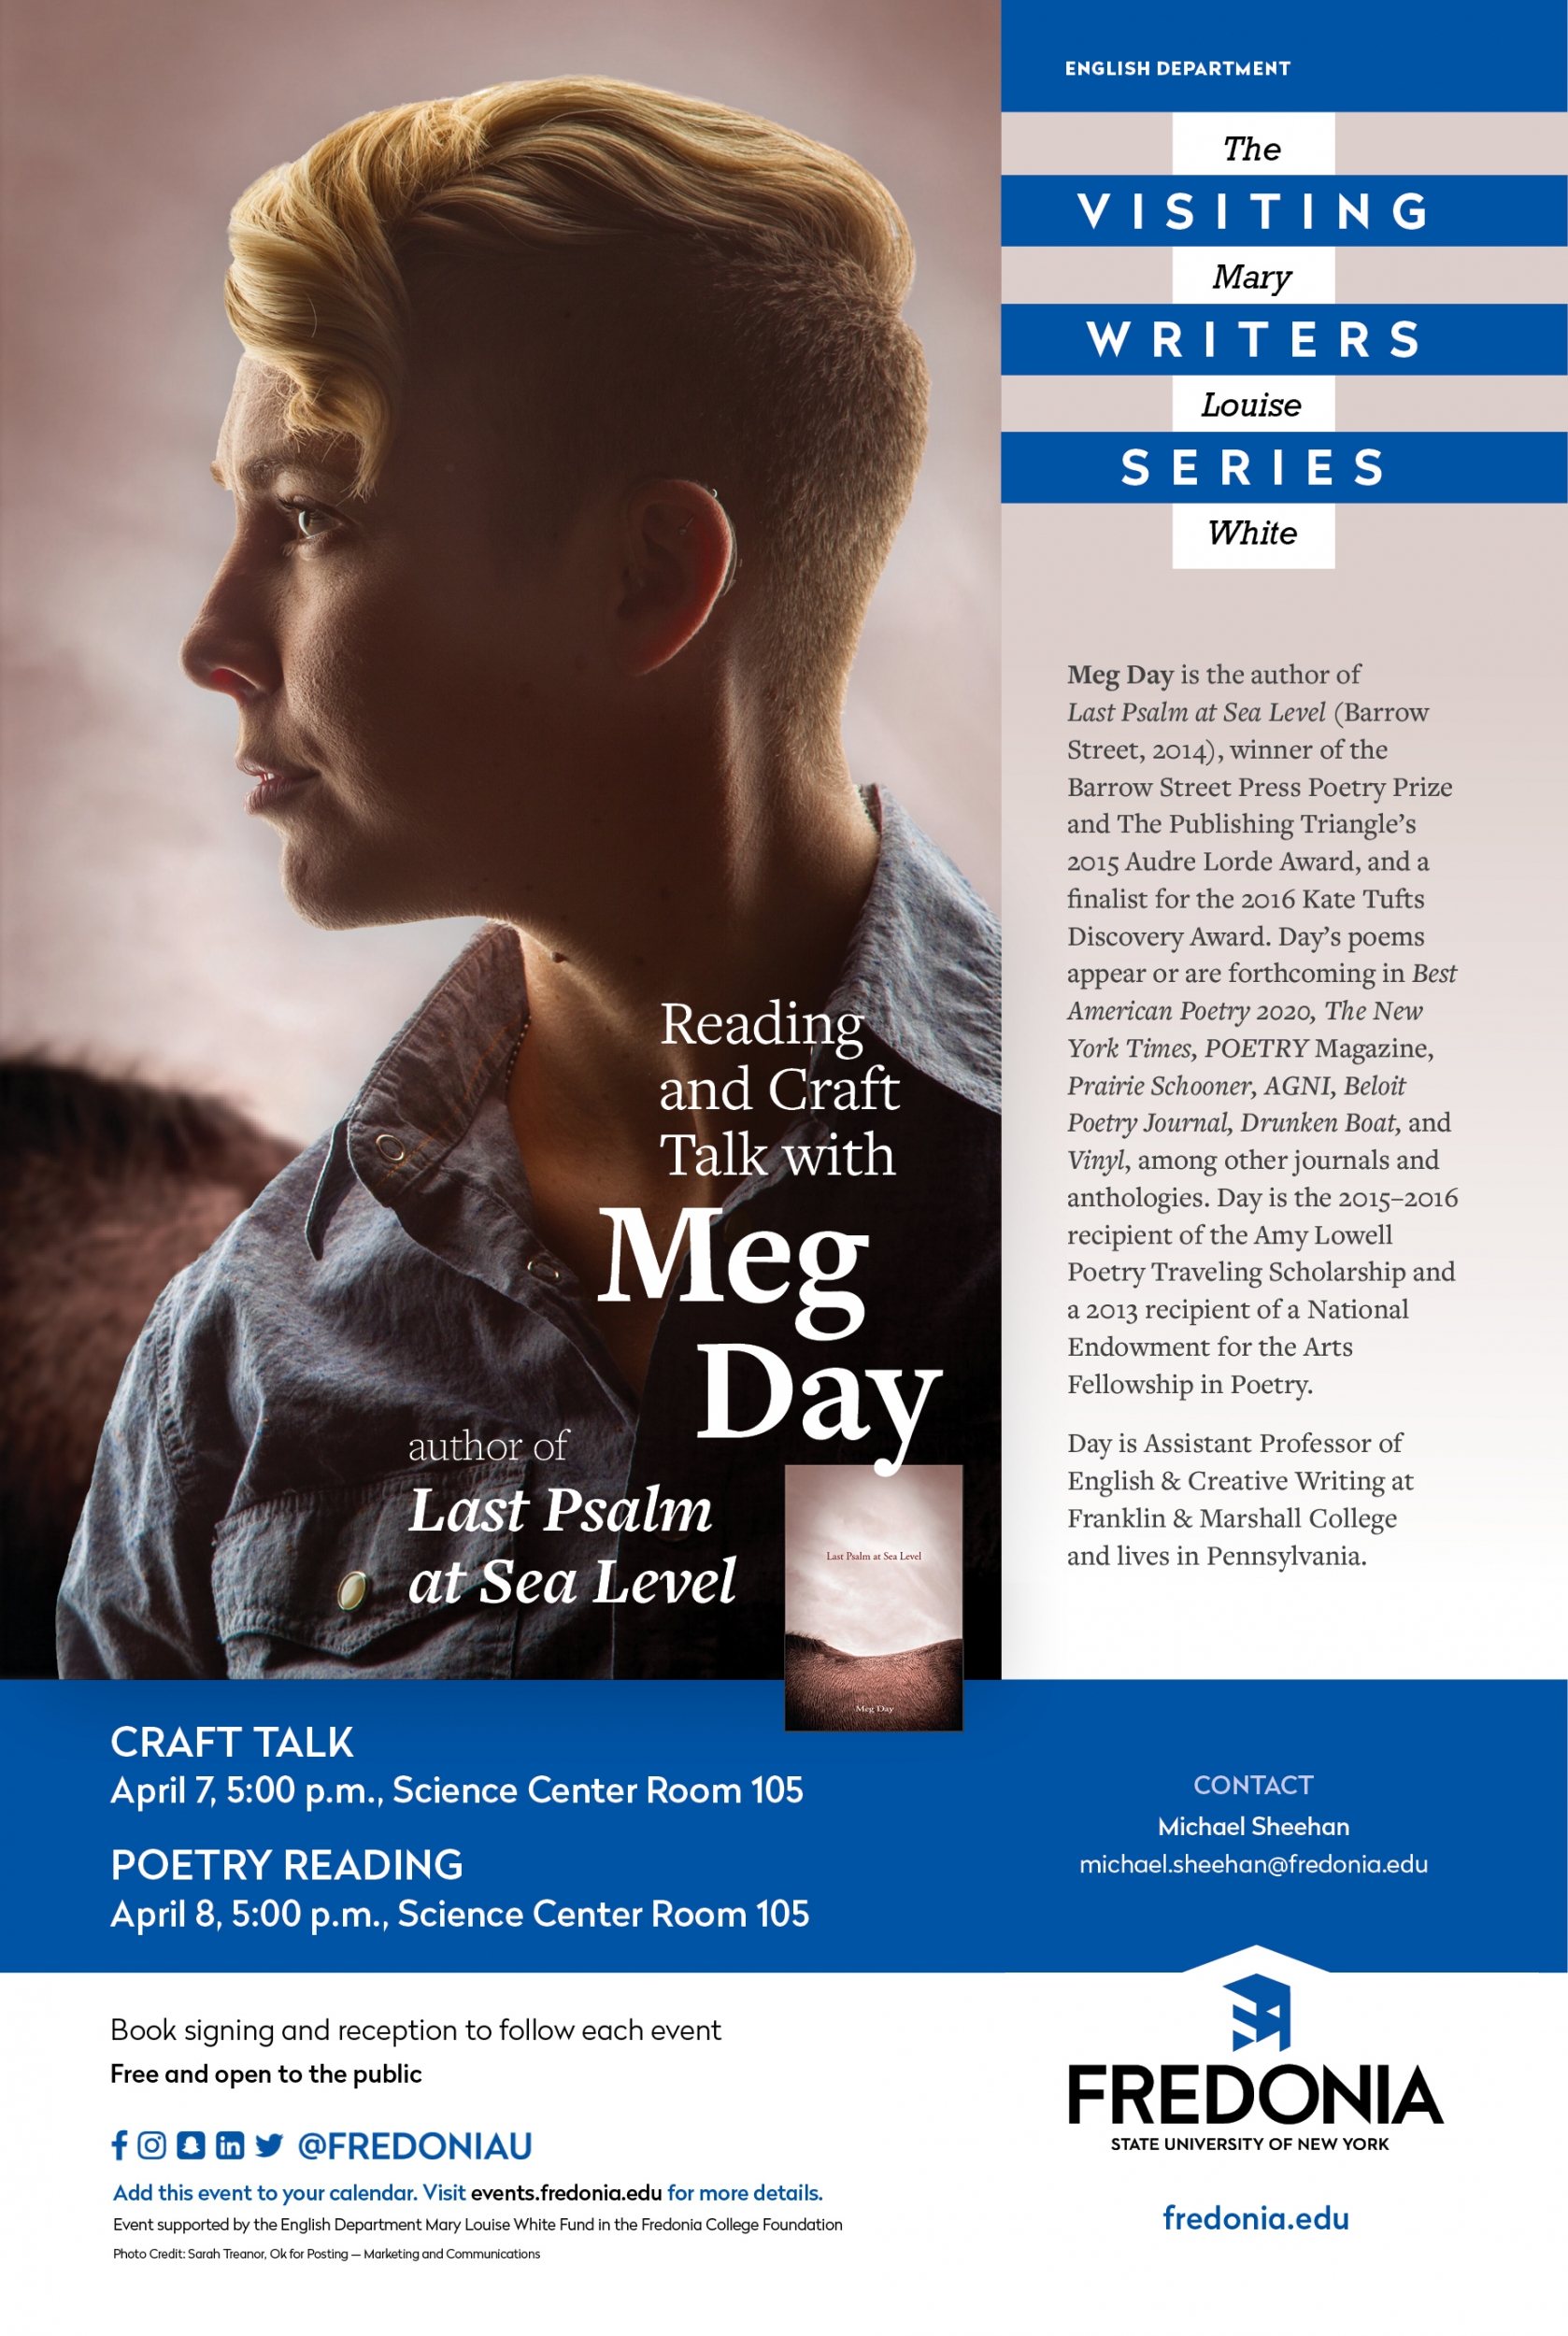 Meg Day, Mary Louise White Visiting Writers Series, April 2020